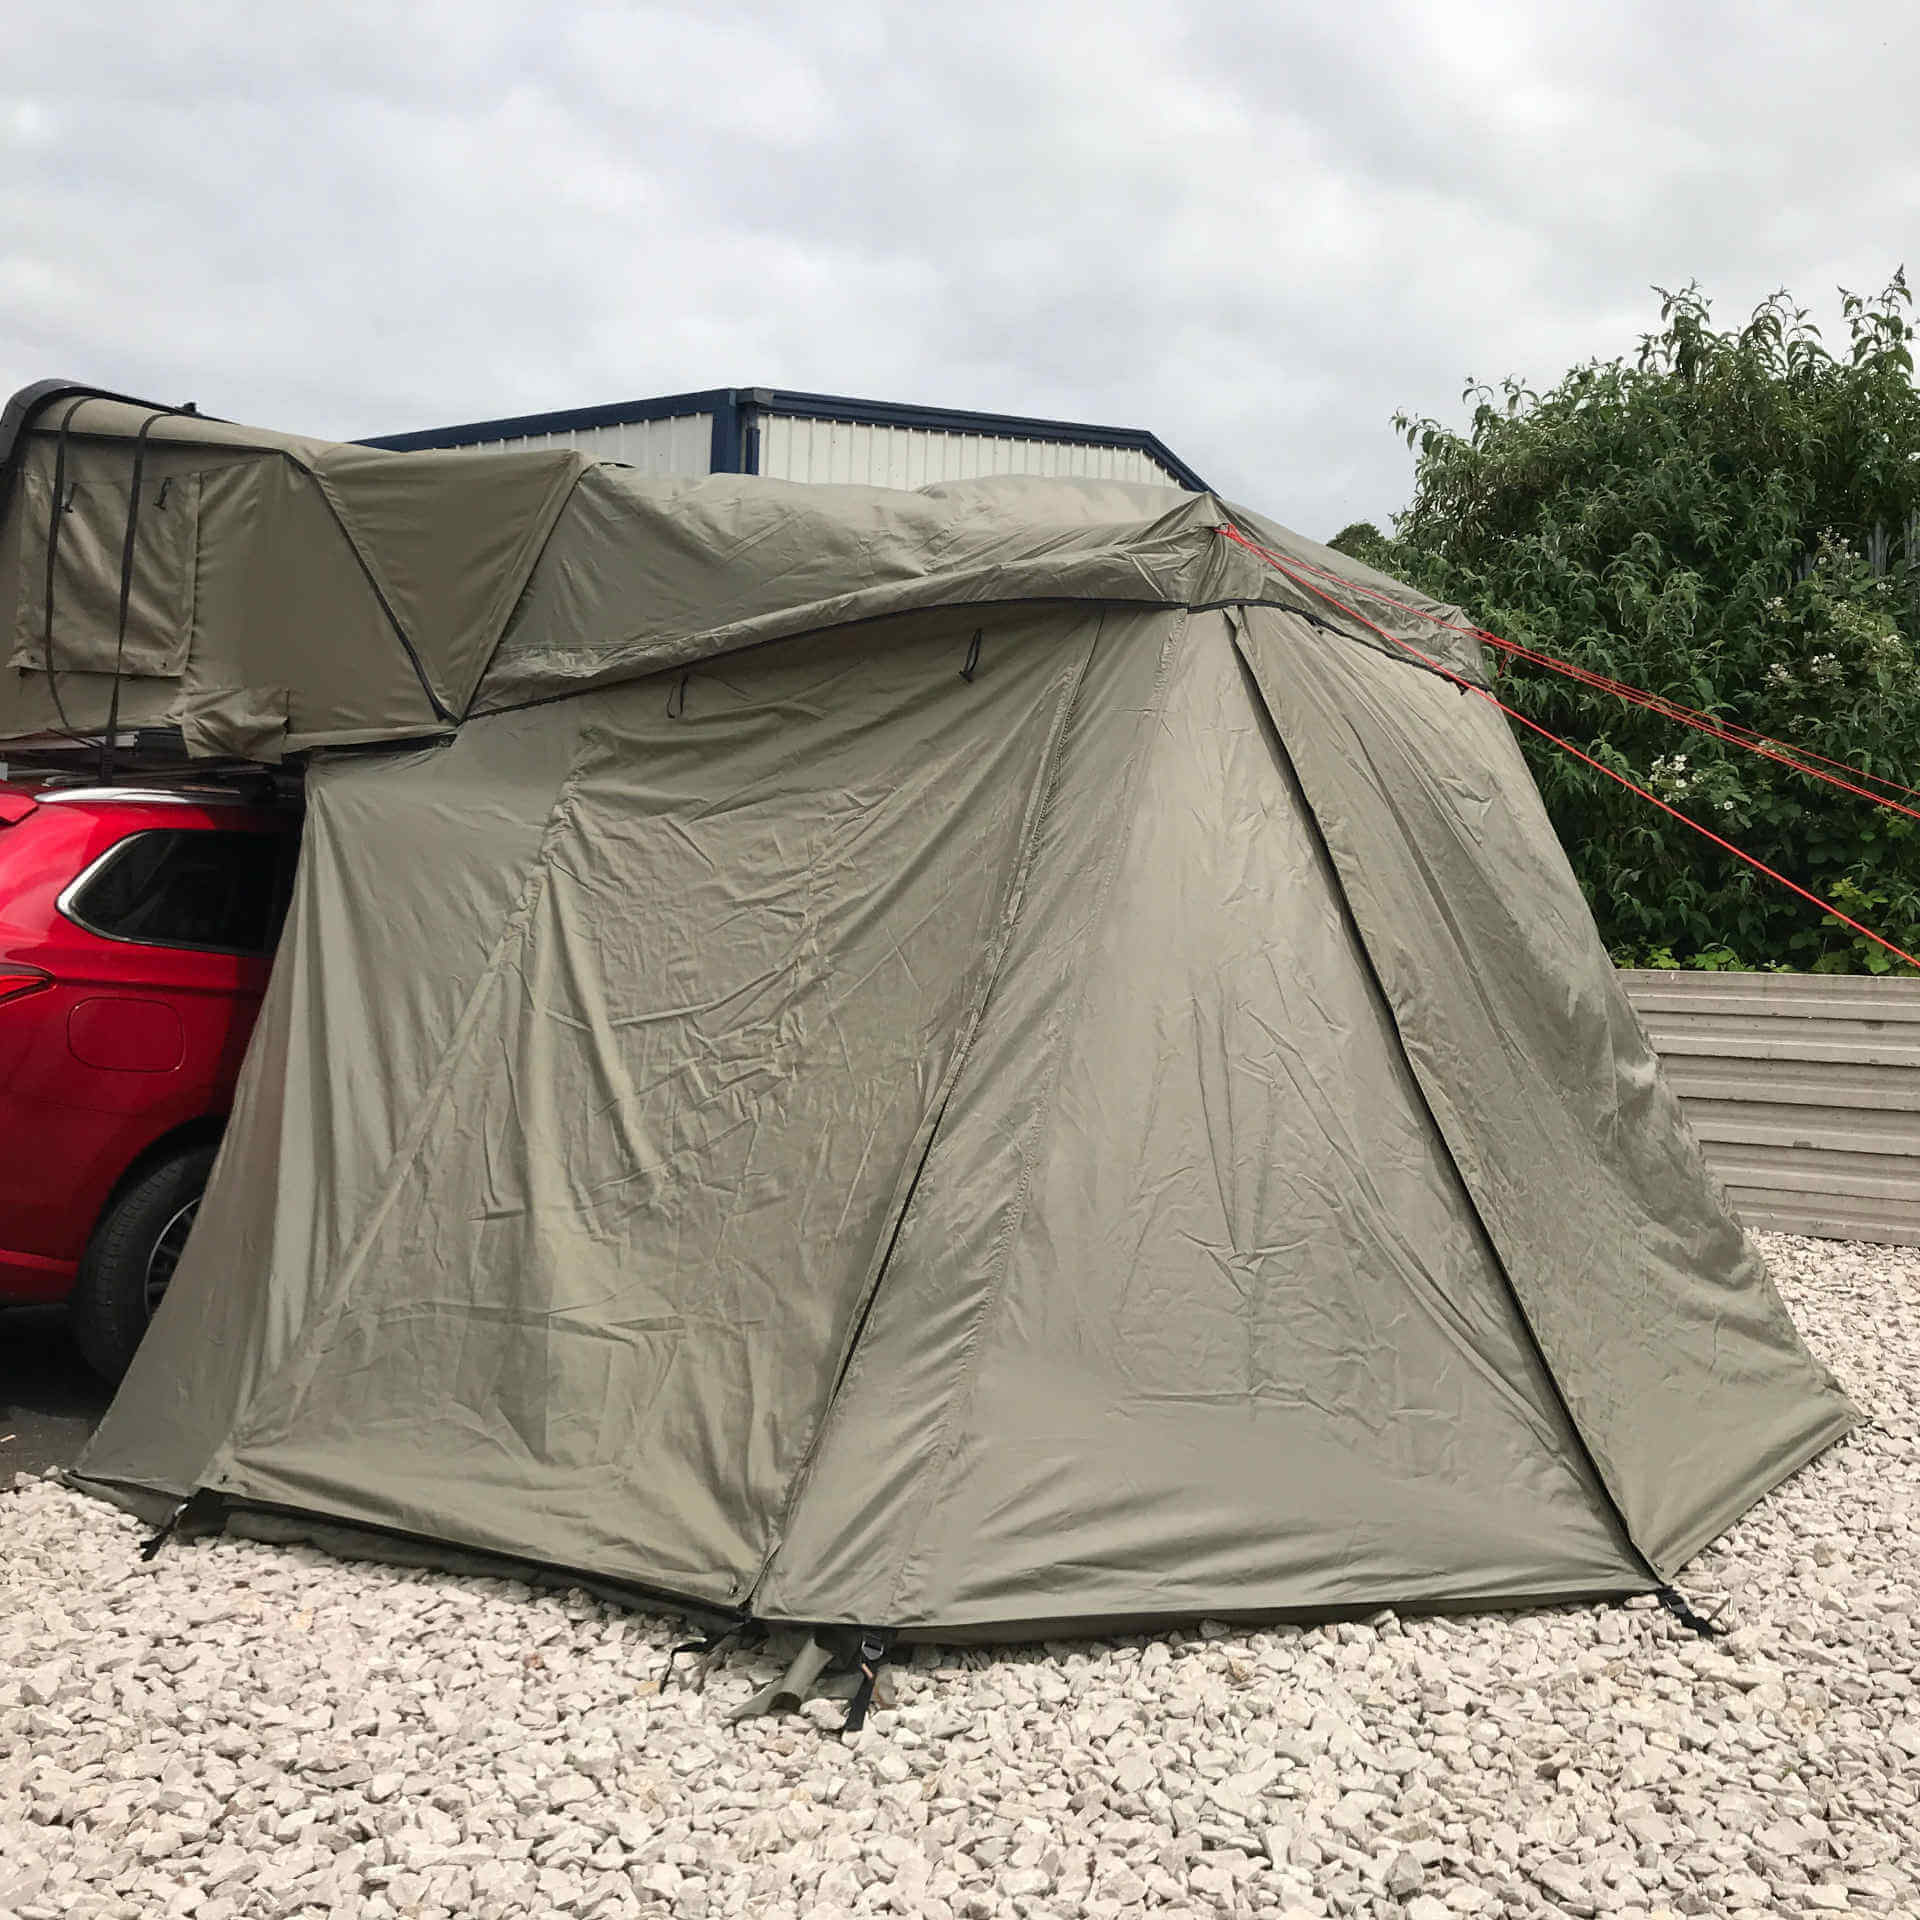 Annex Addon for the Direct4x4 RoofTrekk 3 Person Roof Top Camping Tent in Grey -  - sold by Direct4x4